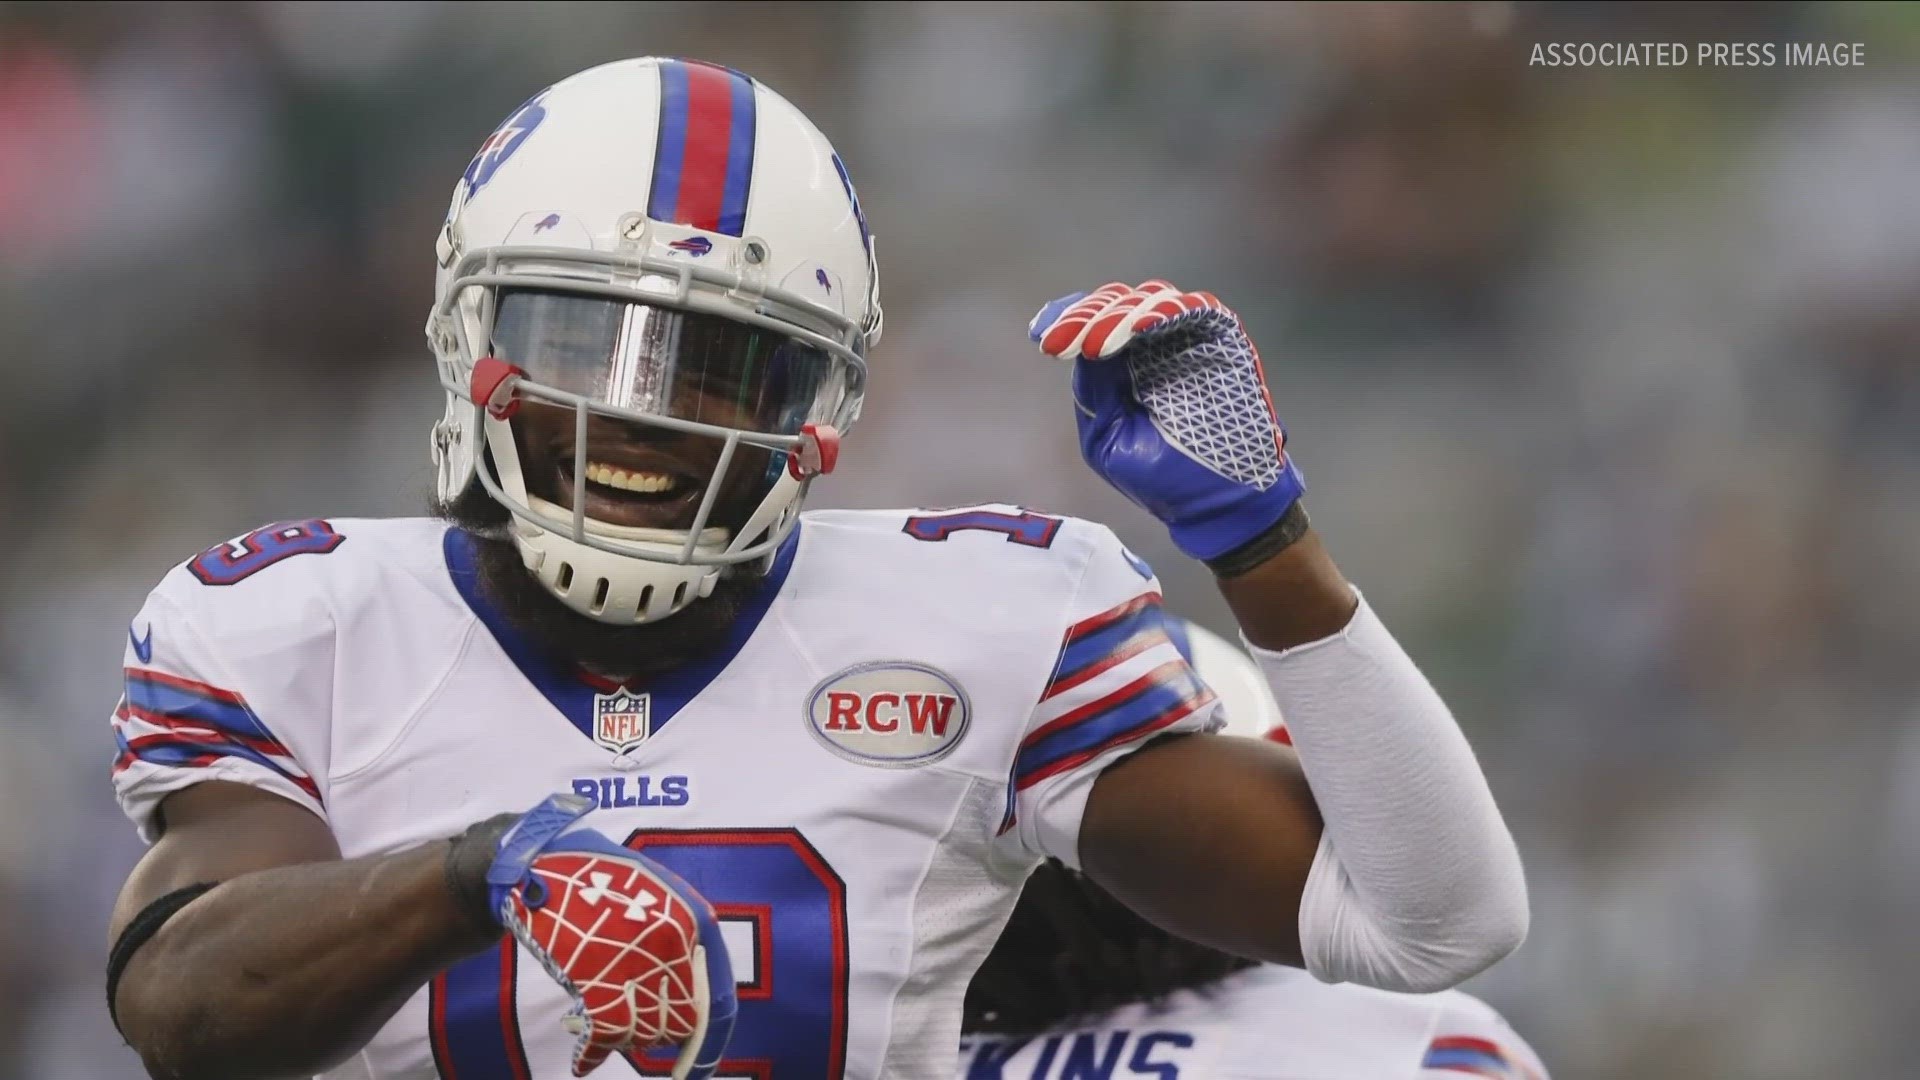 The former Bills and Bucs wide receiver suffered serious injuries in a construction accident.